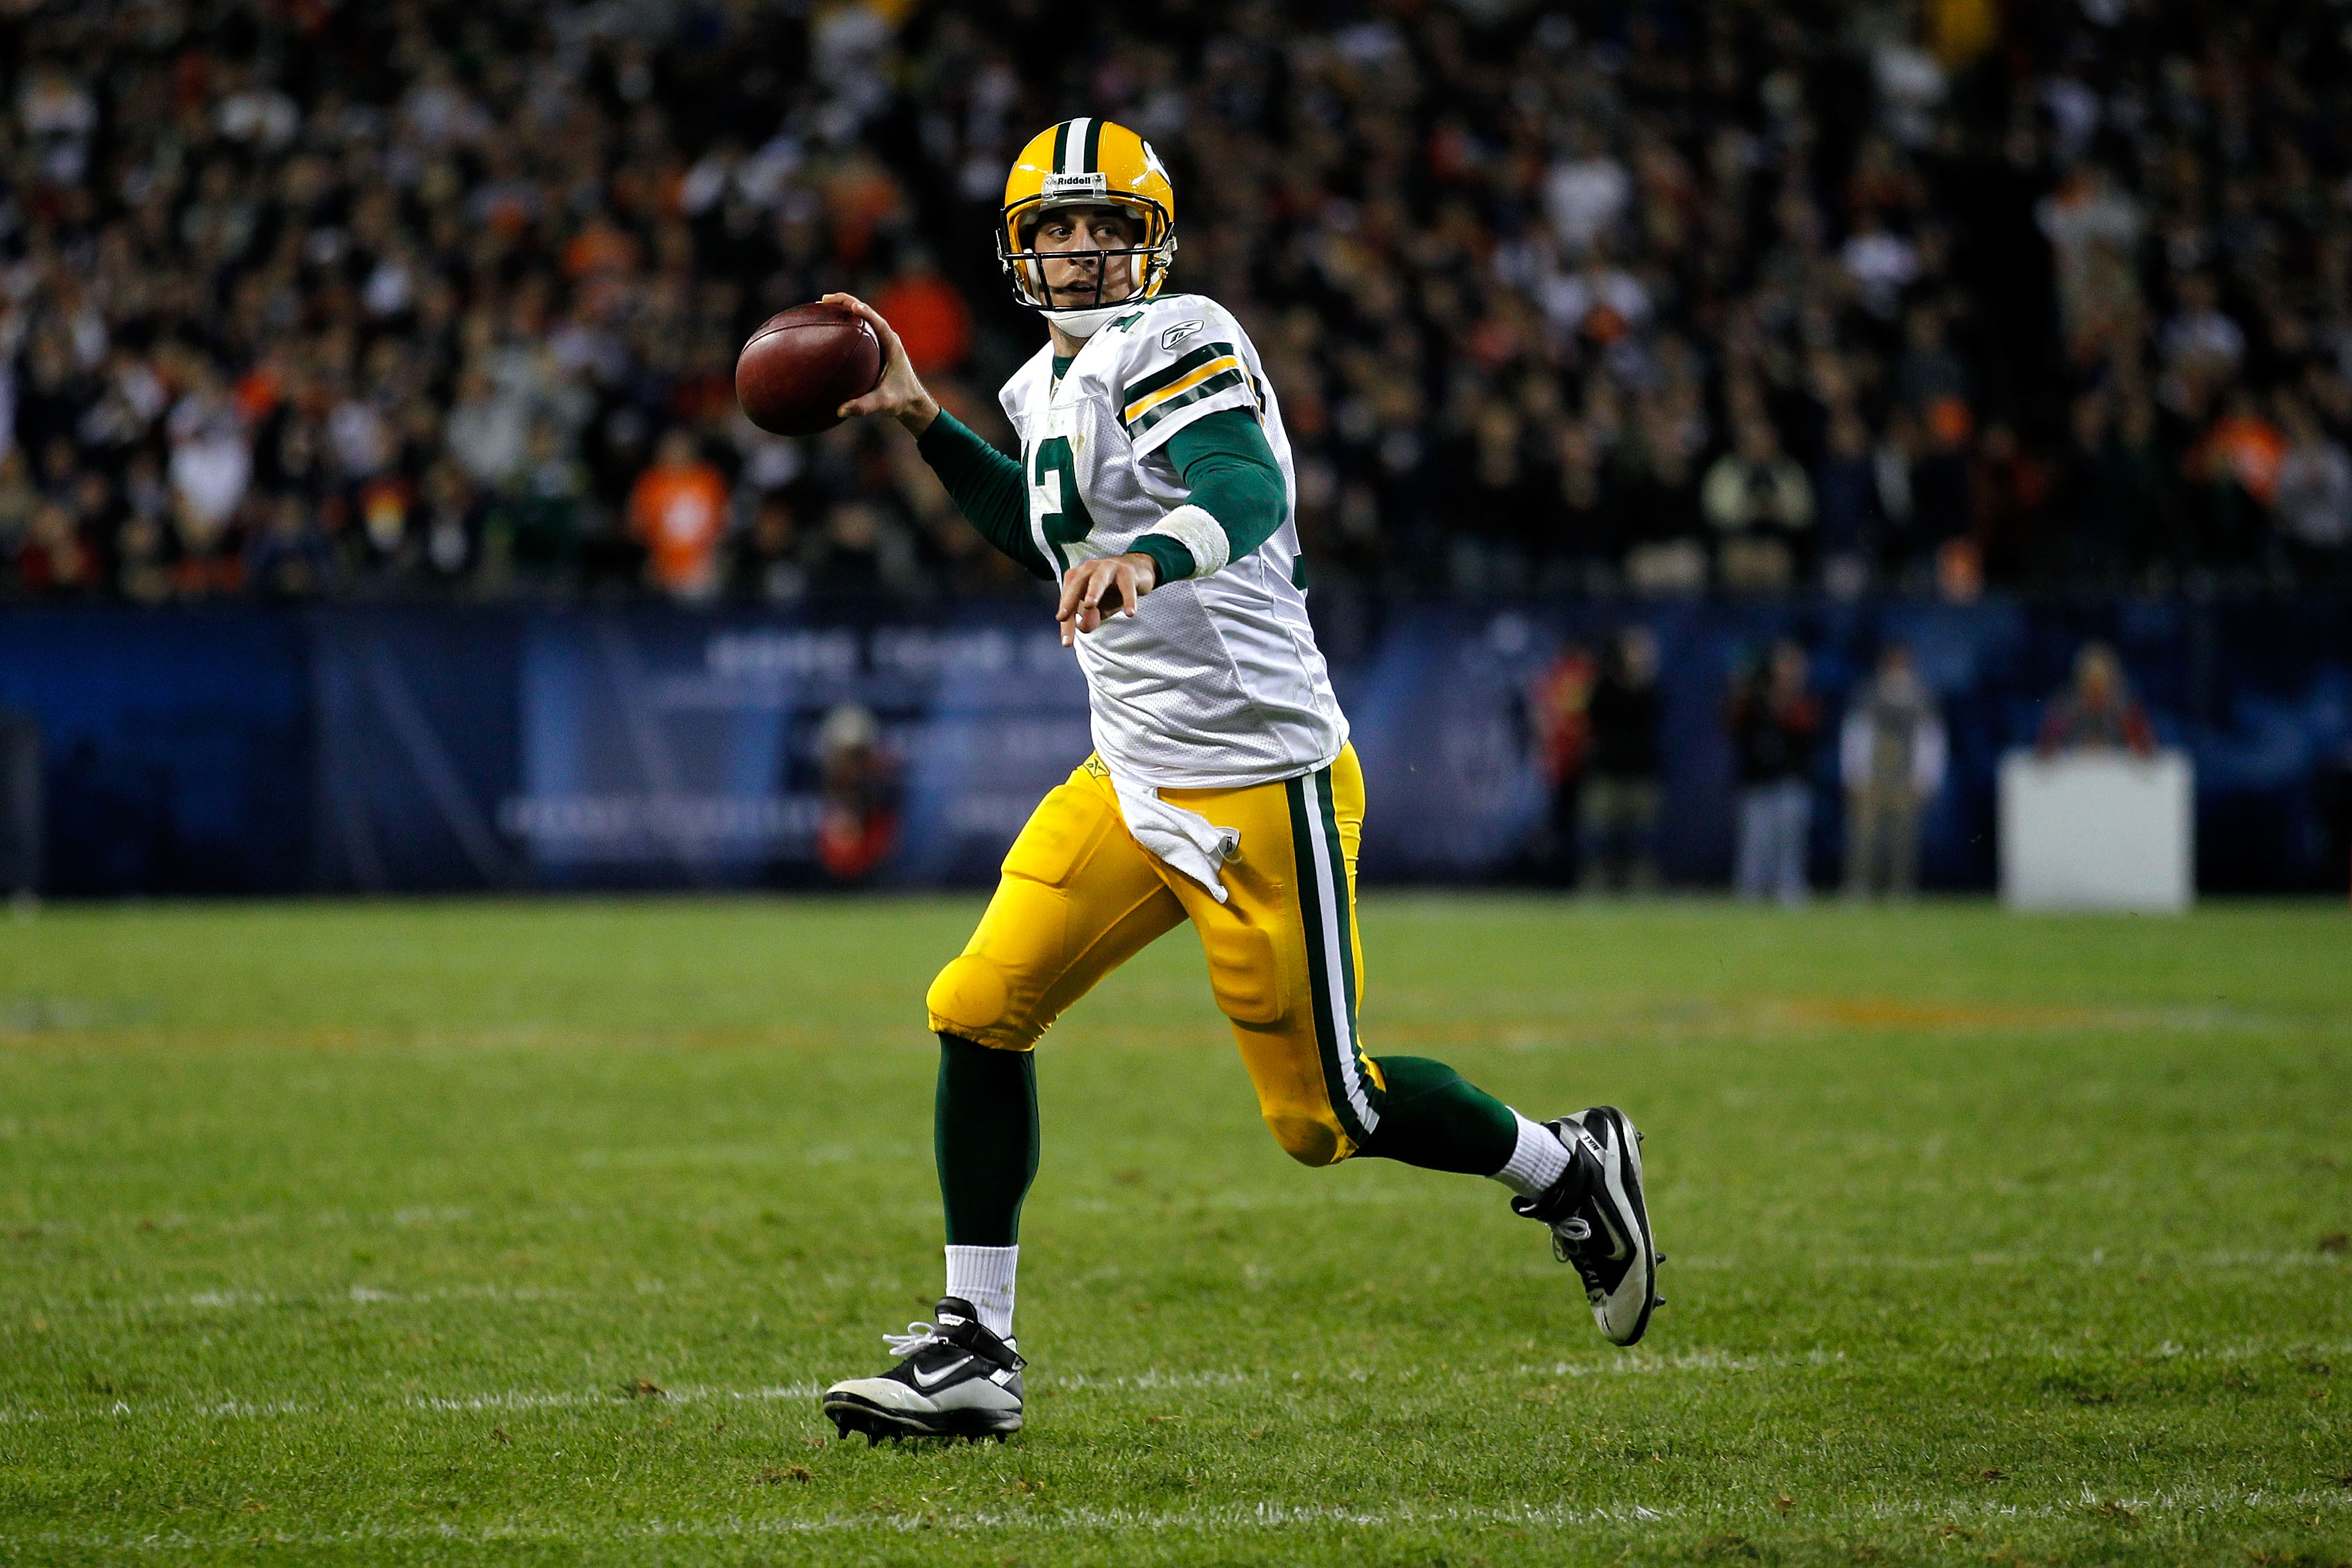 CHICAGO - SEPTEMBER 27:  Quarterback Aaron Rodgers #12 of the Green Bay Packers rolls out to pass against the Chicago Bears at Soldier Field on September 27, 2010 in Chicago, Illinois.  (Photo by Jonathan Daniel/Getty Images)